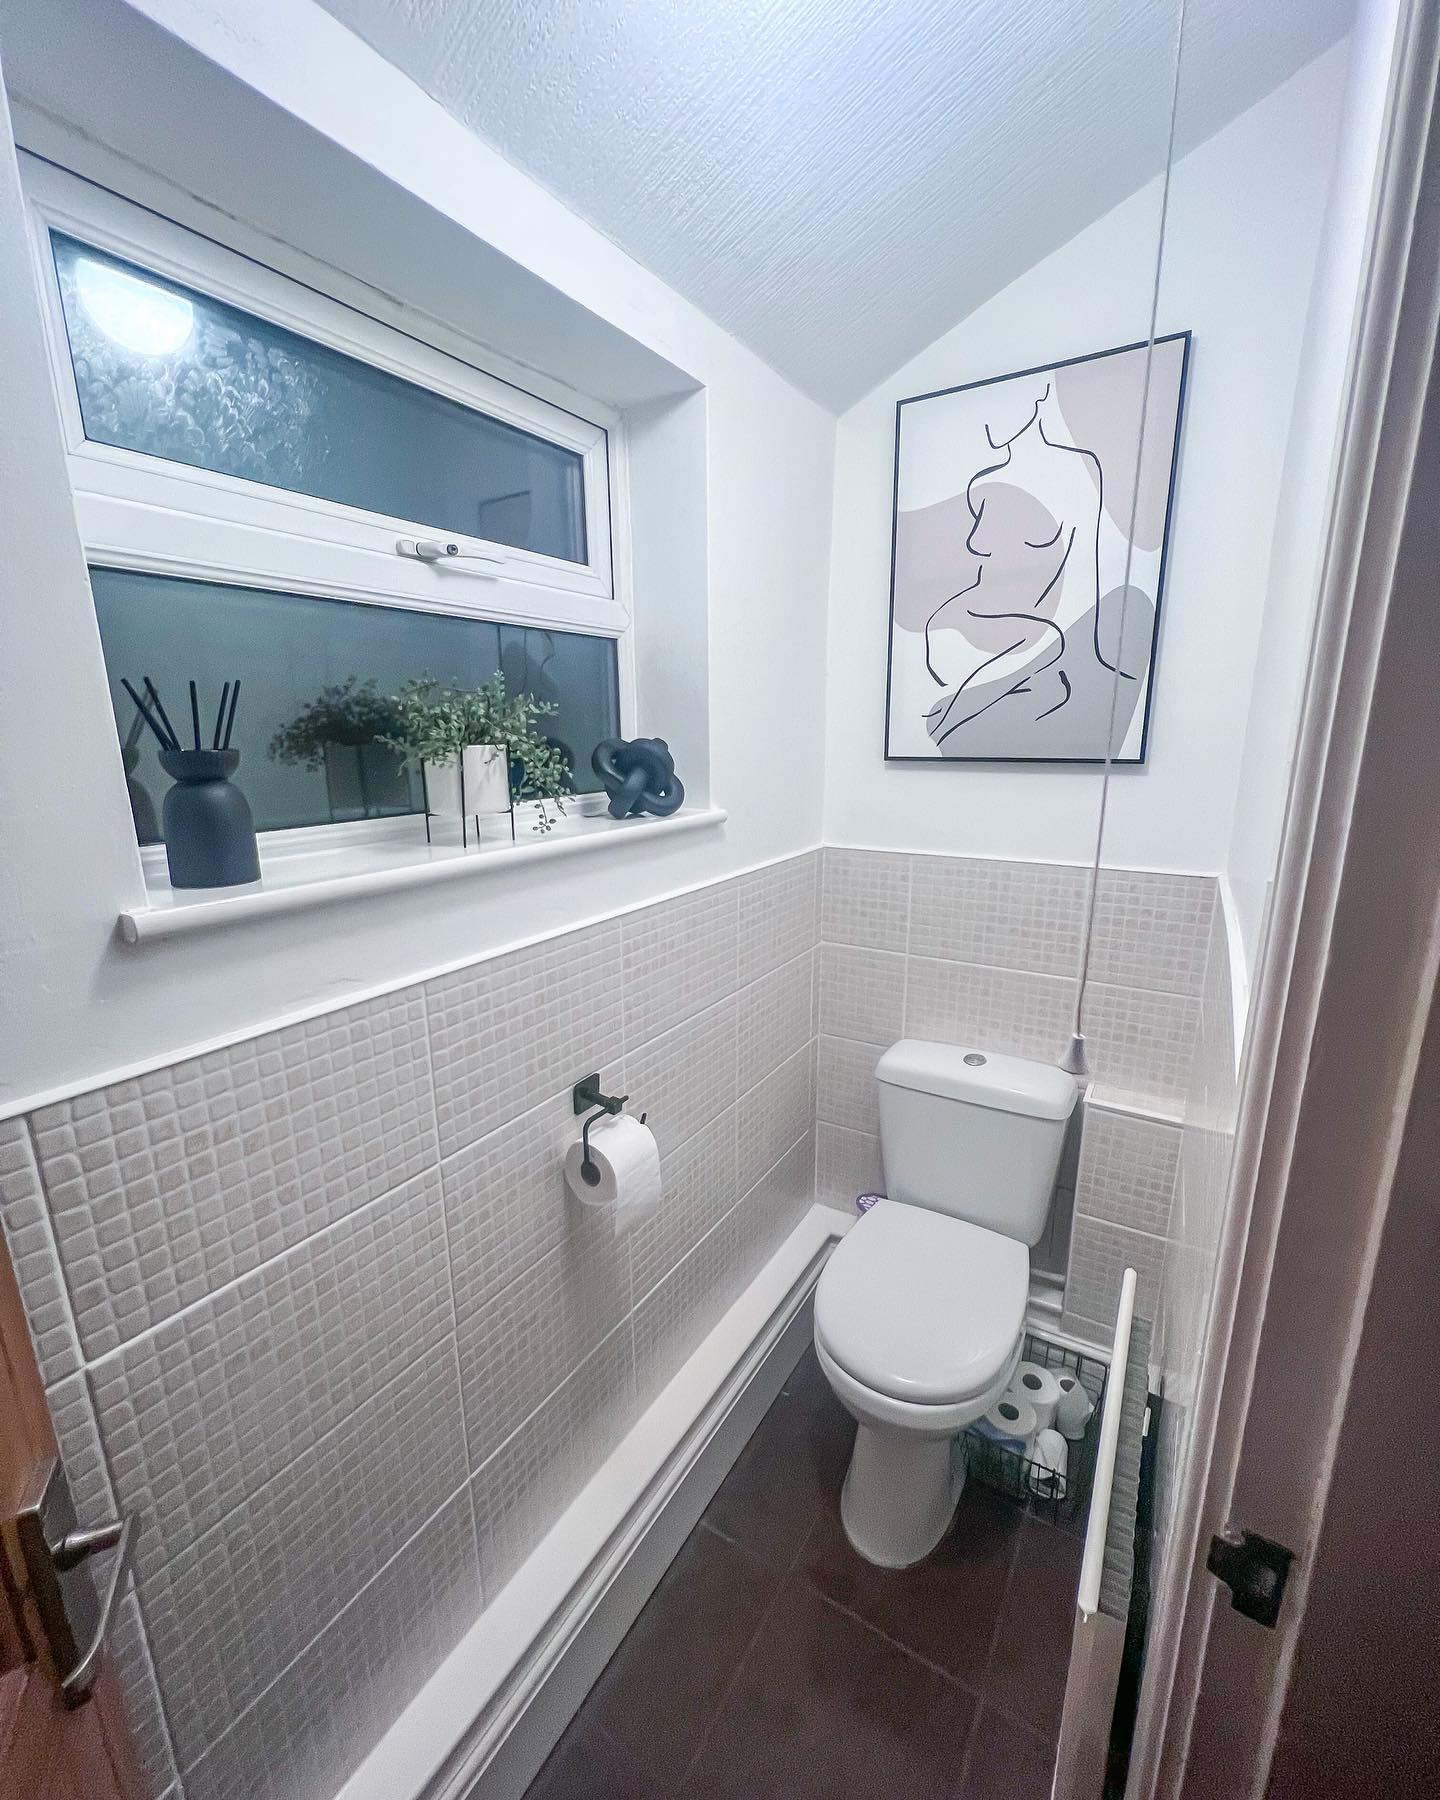 Classy Behind Toilet Decor With Wall Painting